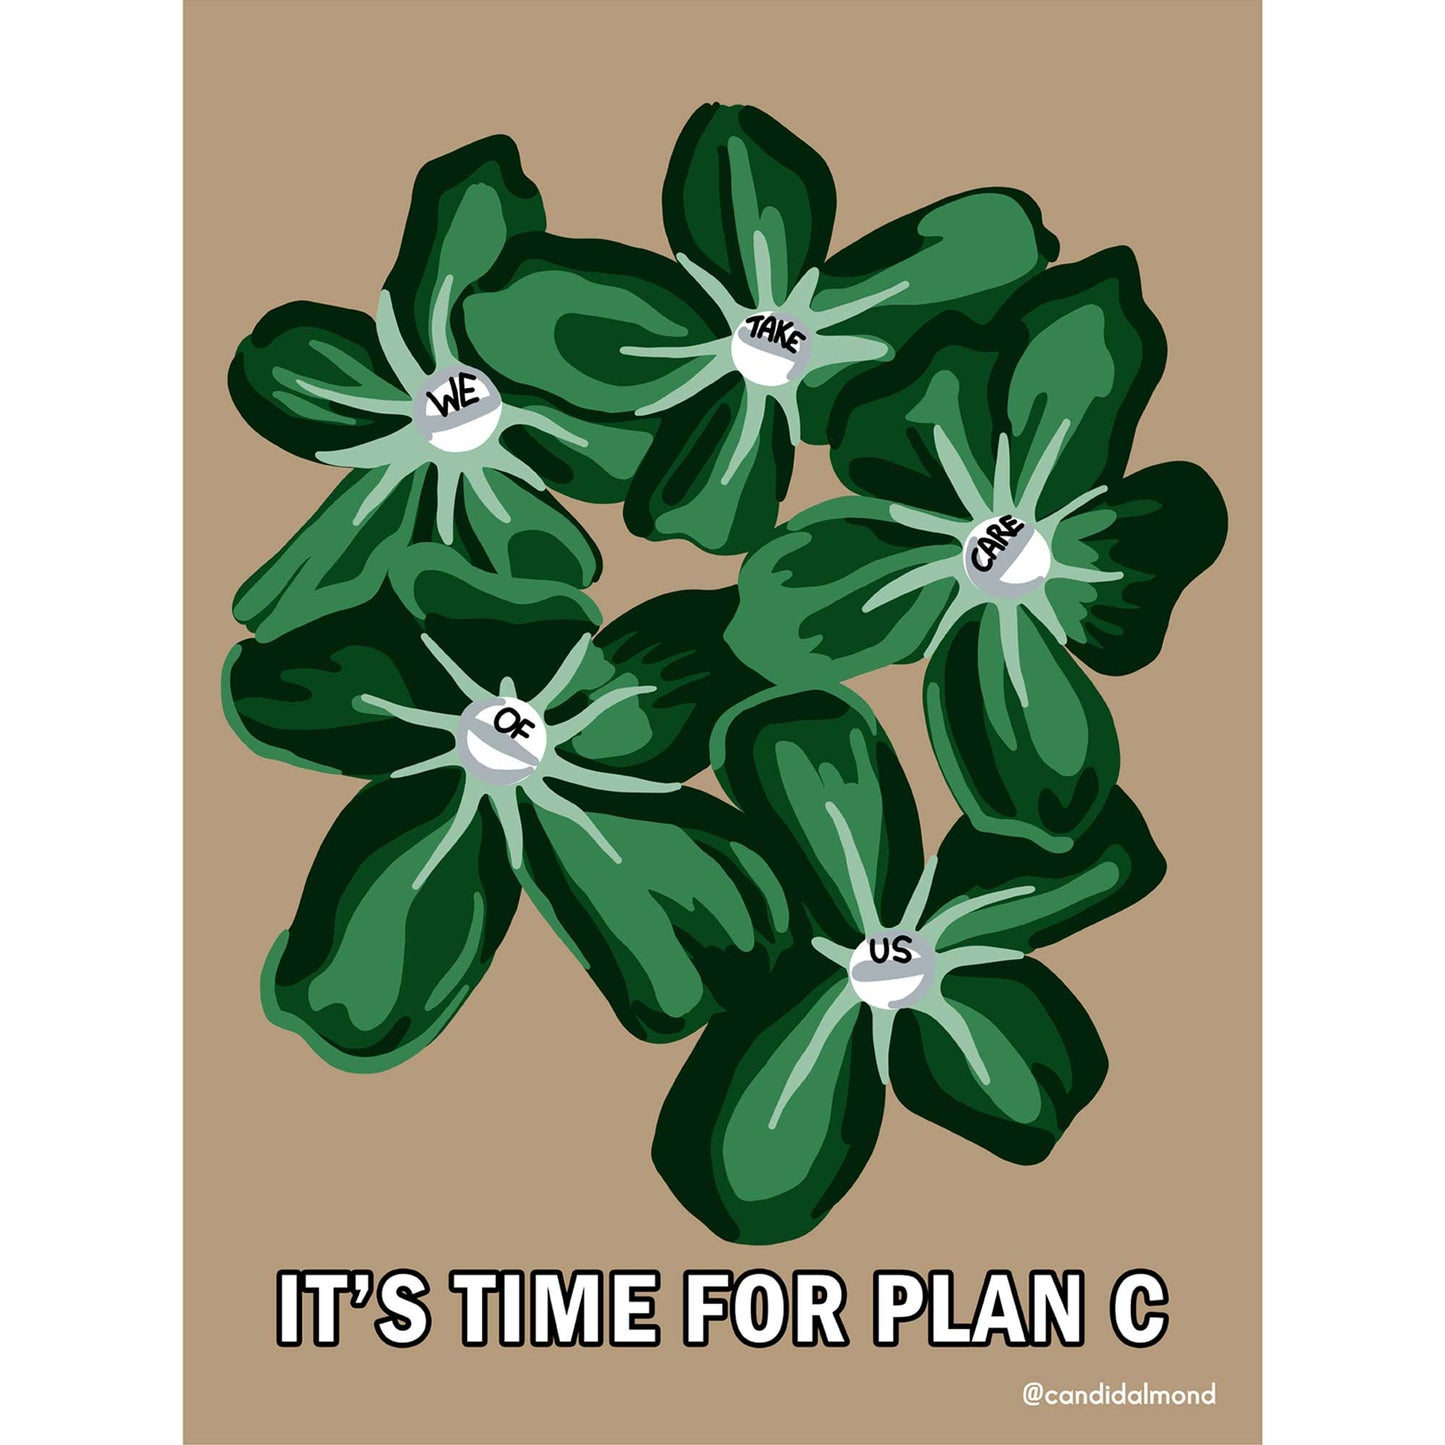 'It's Time For Plan C' FREE Digital Download